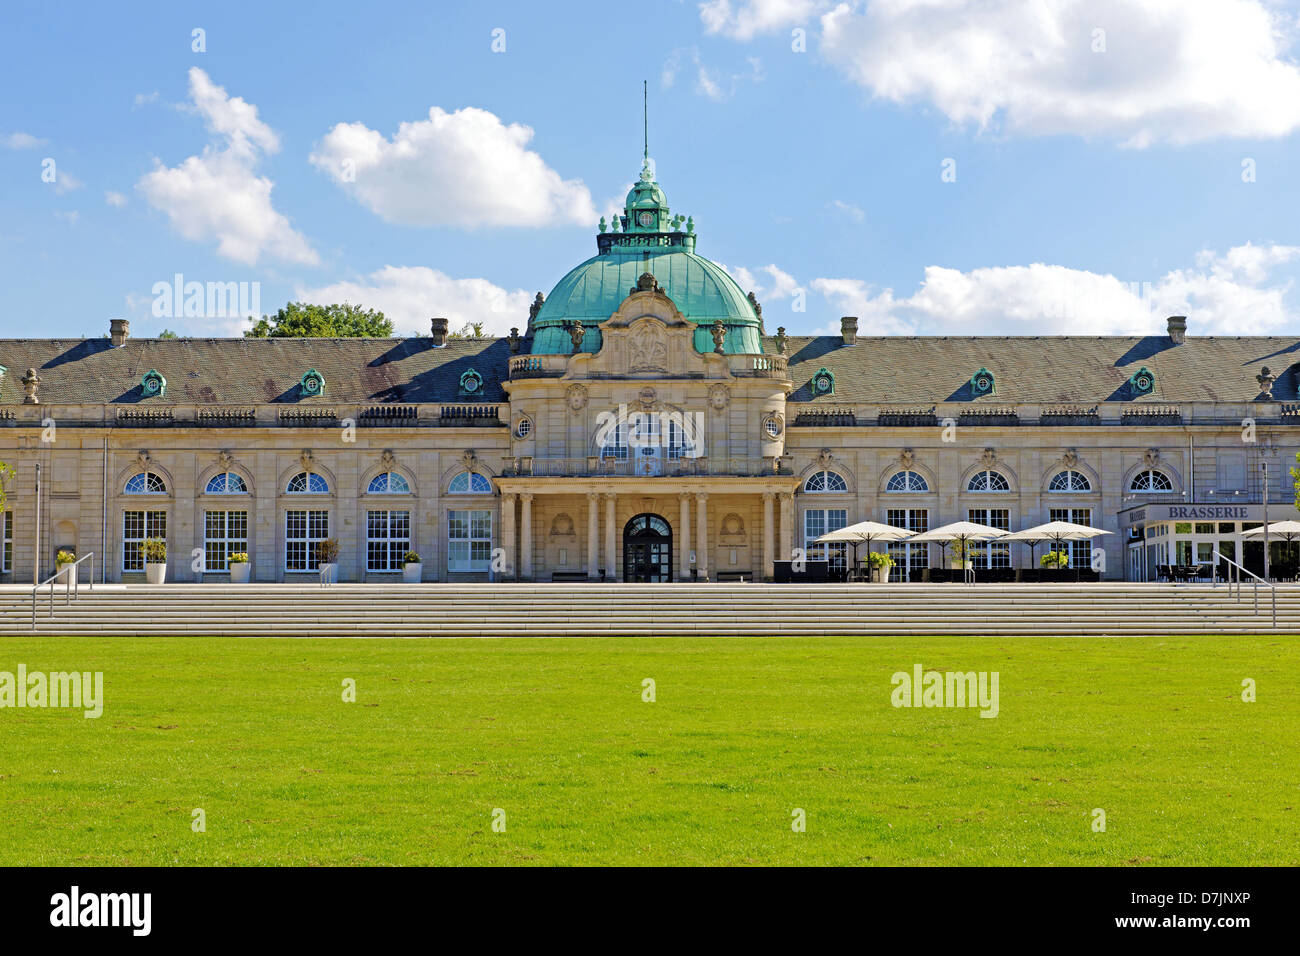 The imperial palace in the health resort park in Bad Oeynhausen, Germany Stock Photo